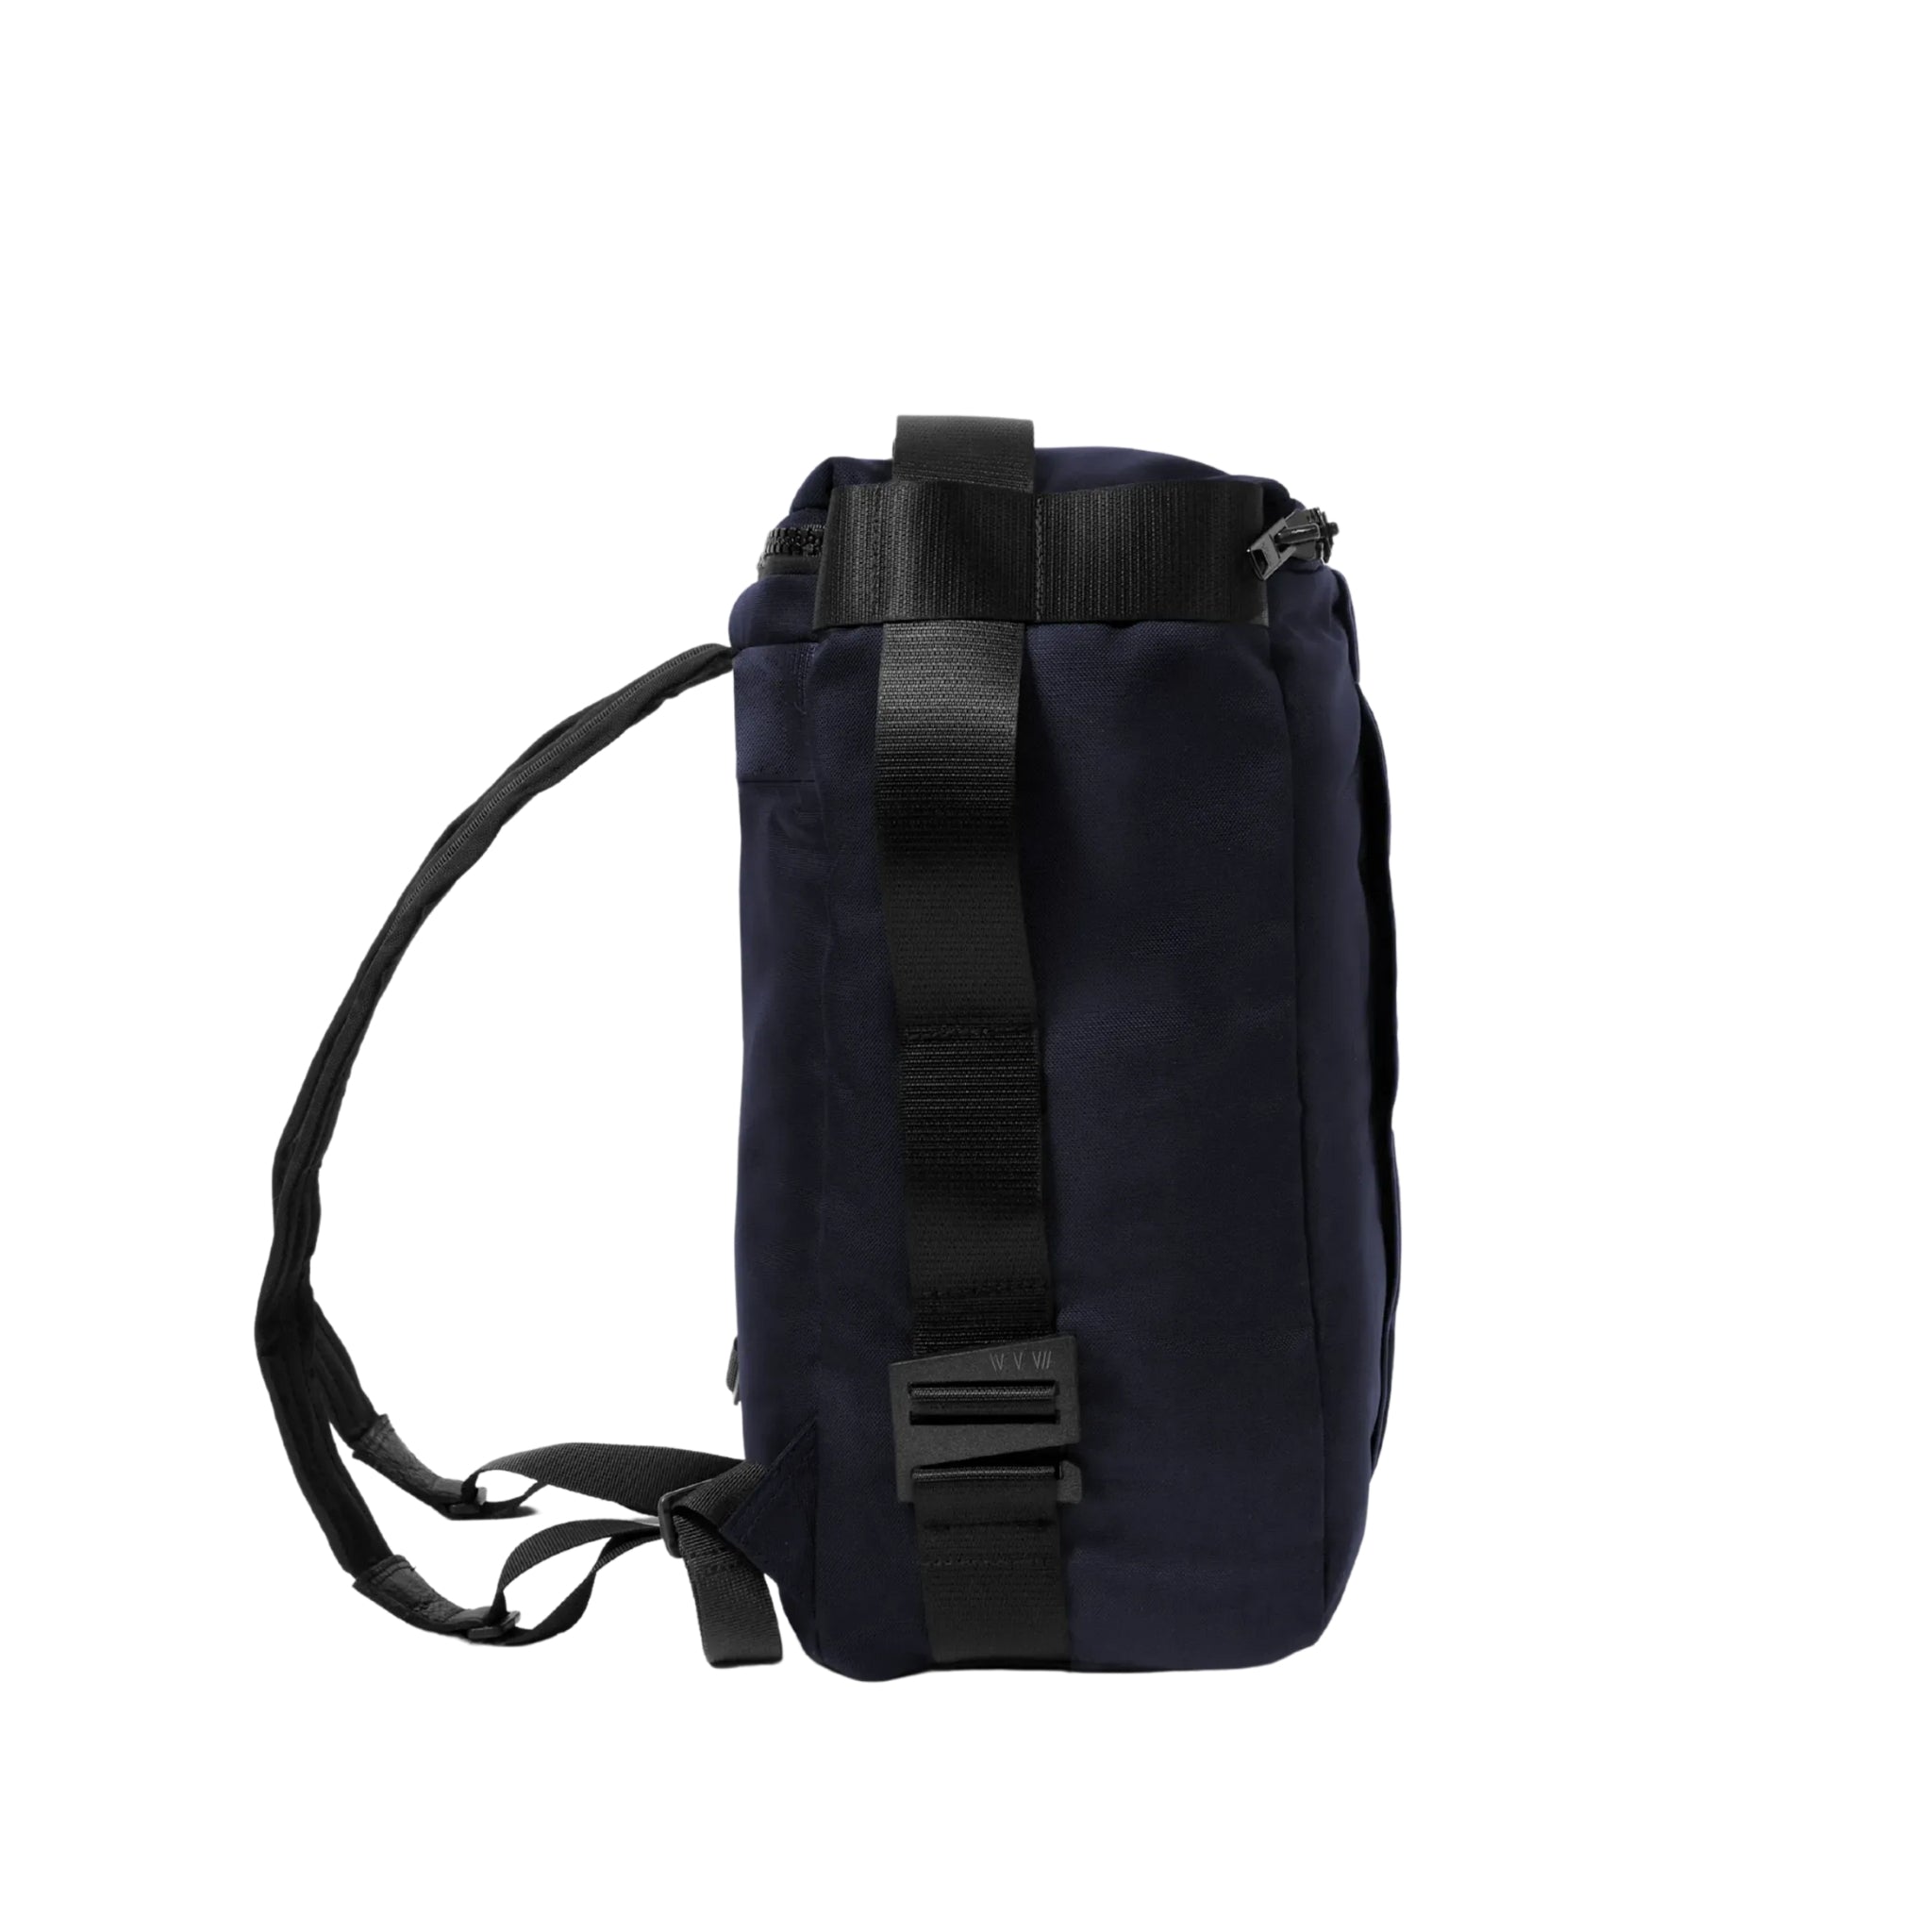 the side of an Interesting rectangular shaped backpack in navy upcycled material on a white background.